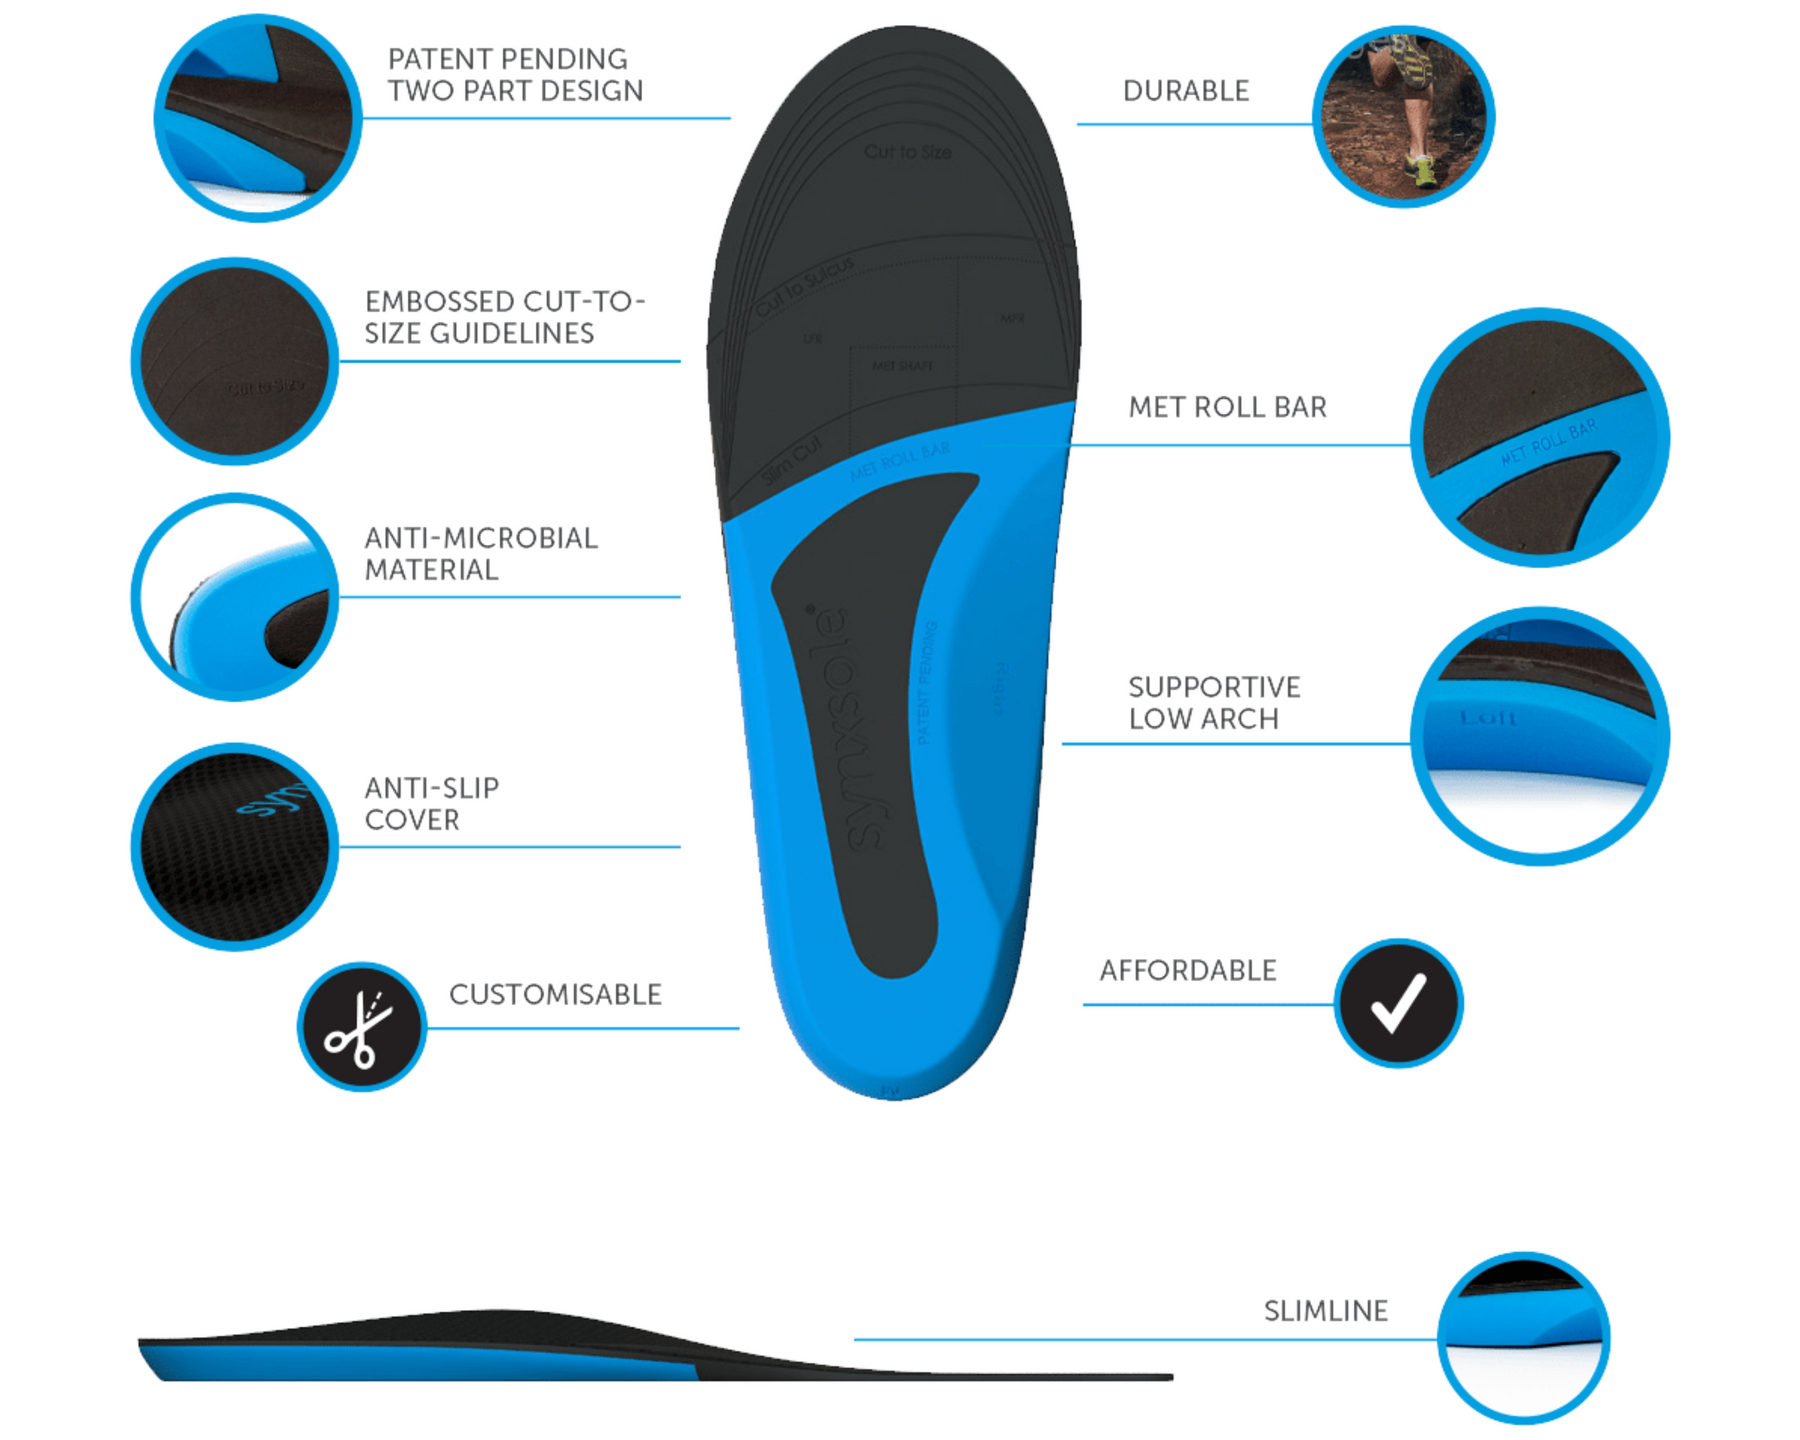 infographic - synxsole one stop insole next to feet, pronation, flat feet, align the body, support feet, support lower limbs, protect joints, antimicrobial material, antislip cover, customisable, supprotive low arch, met roll bar, durable, affordable